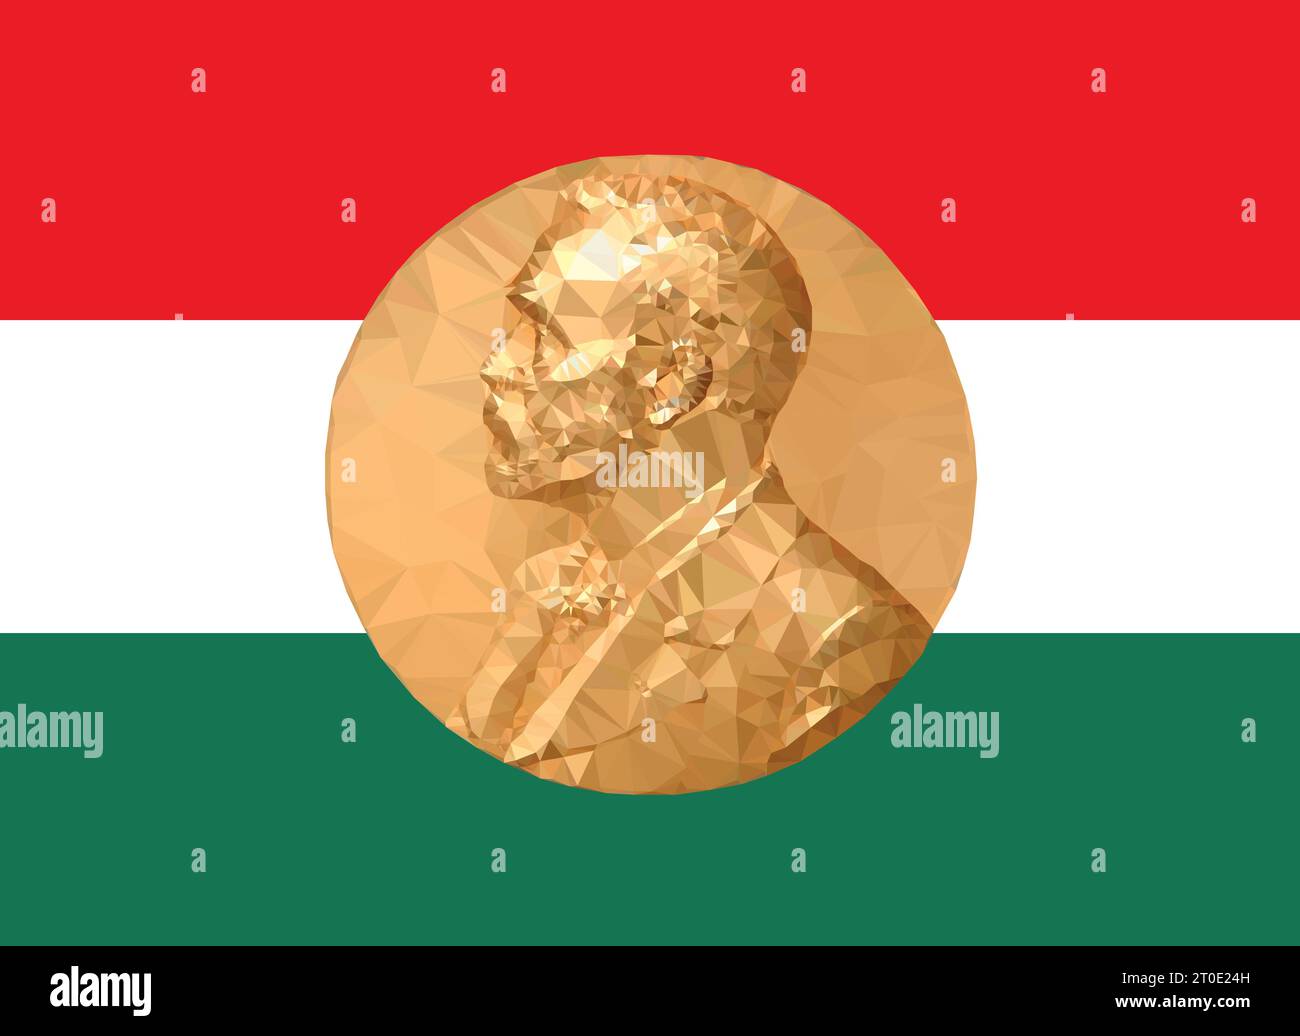 Gold Medal Nobel prize with Hungary flag in background, vector illustration Stock Vector